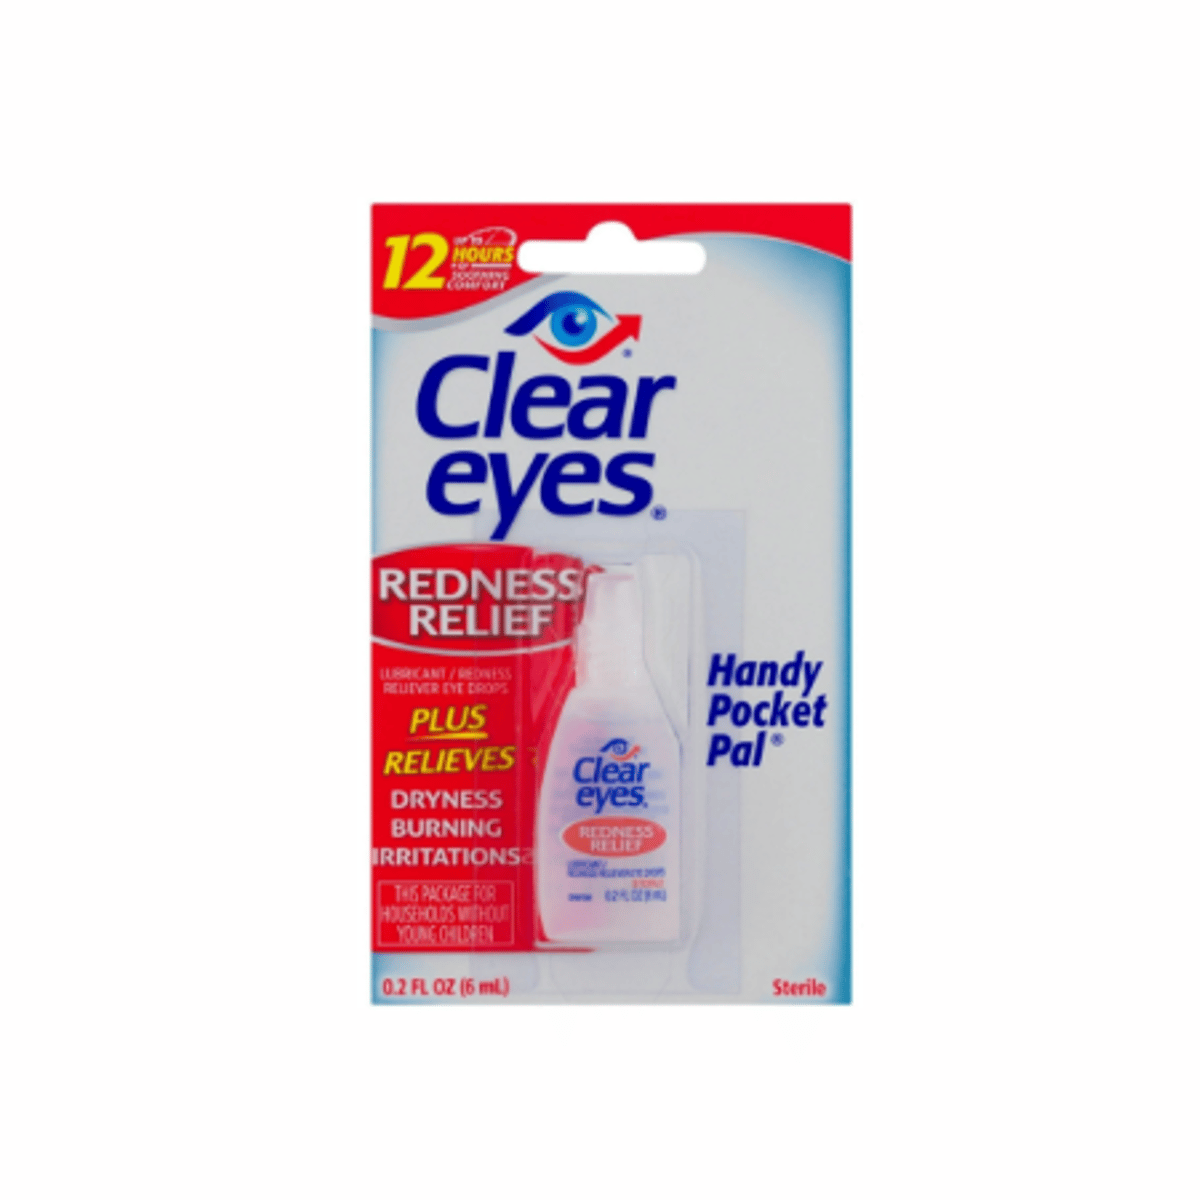 Clear Eyes Handy Pocket Pal Redness Relief Eye Drops